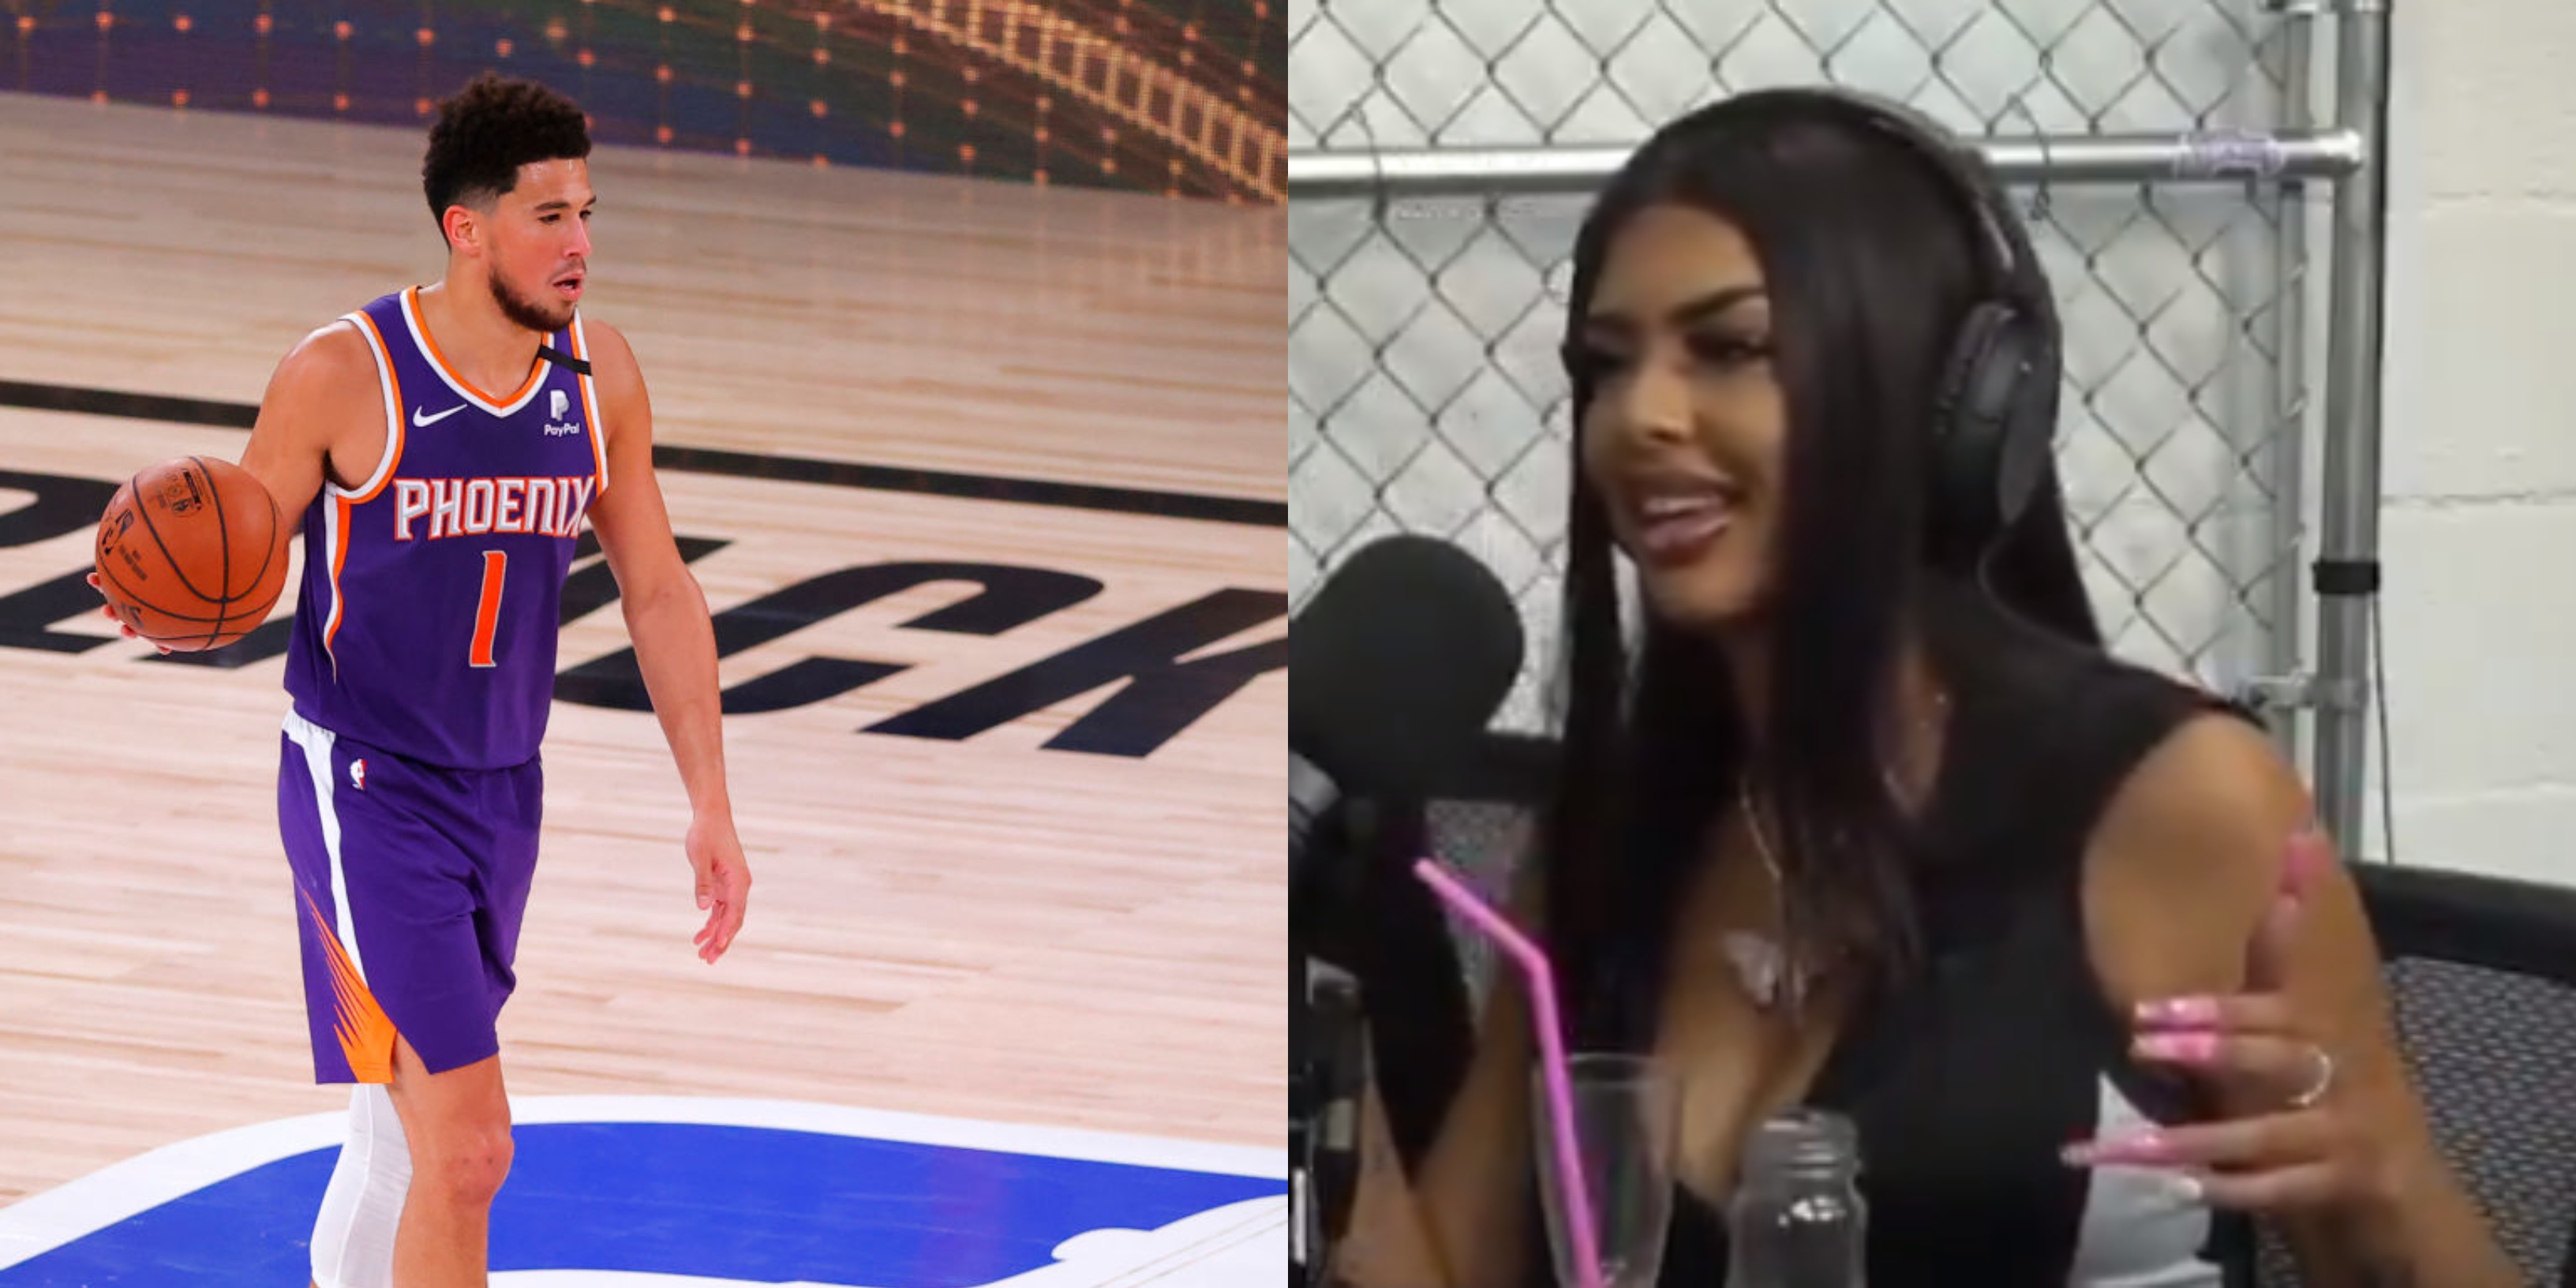 IG Model Goes Into Full Details of Her Oral Encounter With Devin Booker (VI...